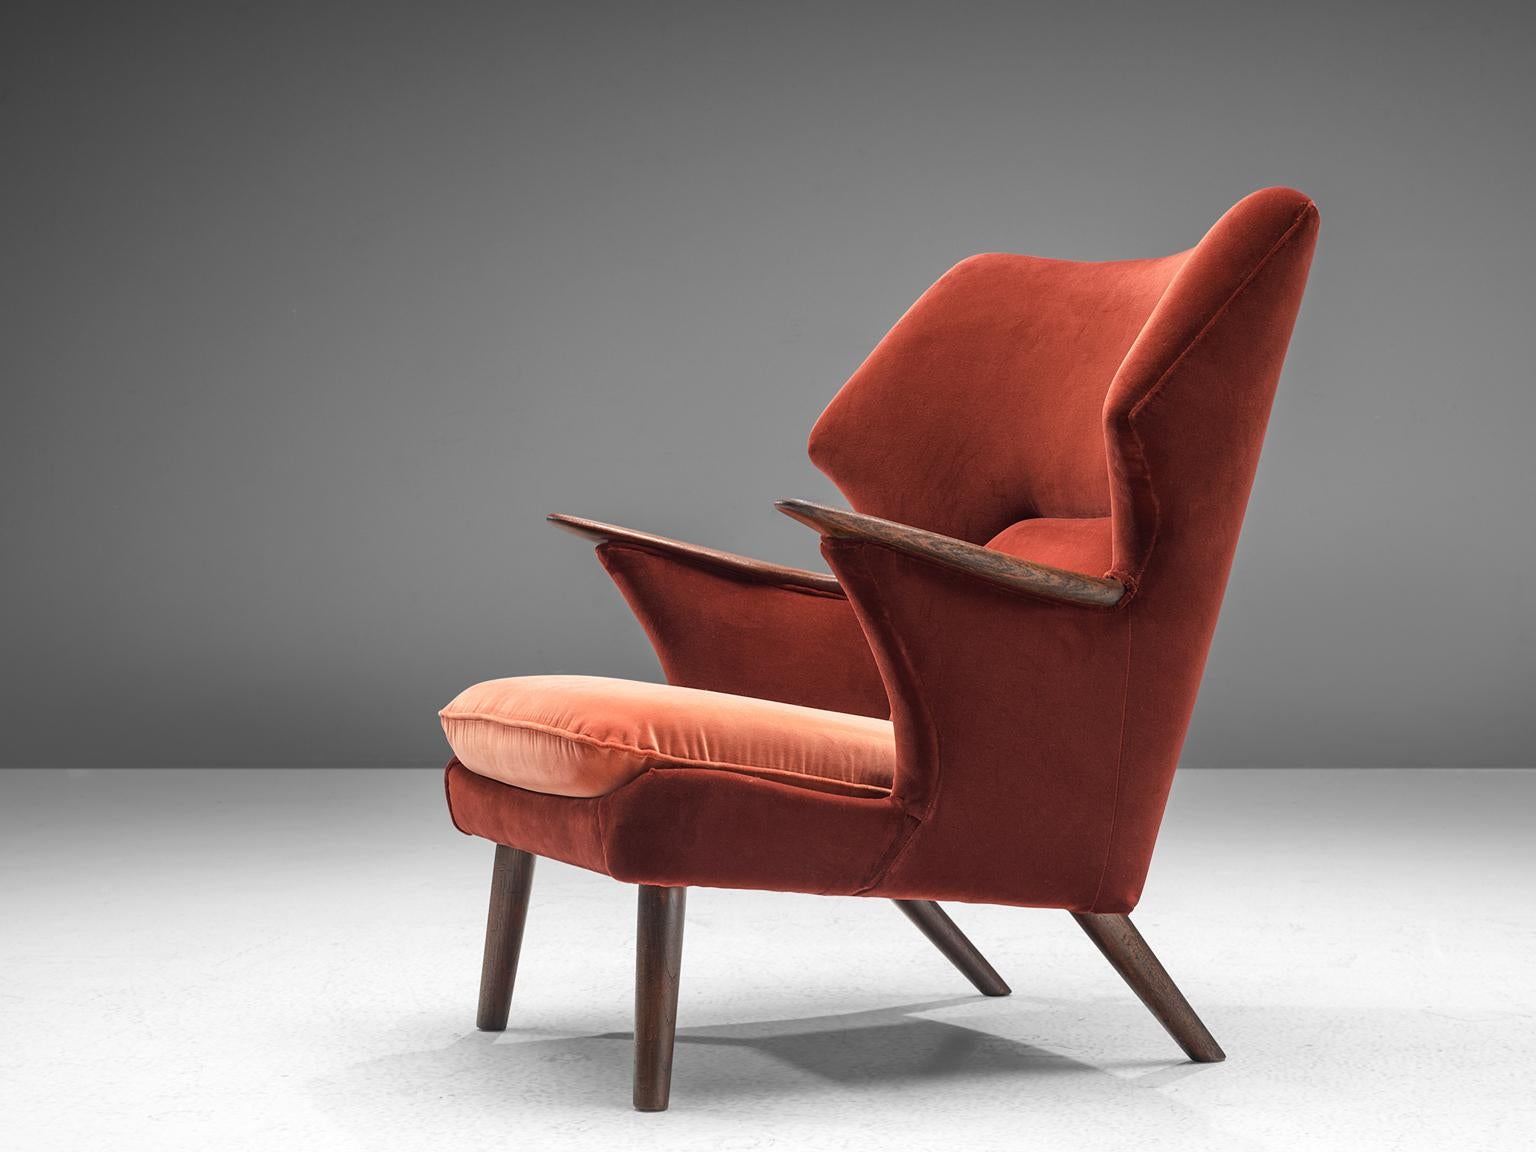 Wing Back chair, red velvet and darkened oak, Denmark, 1950s.

Beautiful Danish wingback chair with a notable design. The back with wide ears create an intimate feeling for the sitter. The long armrests are finished with a wooden top, that